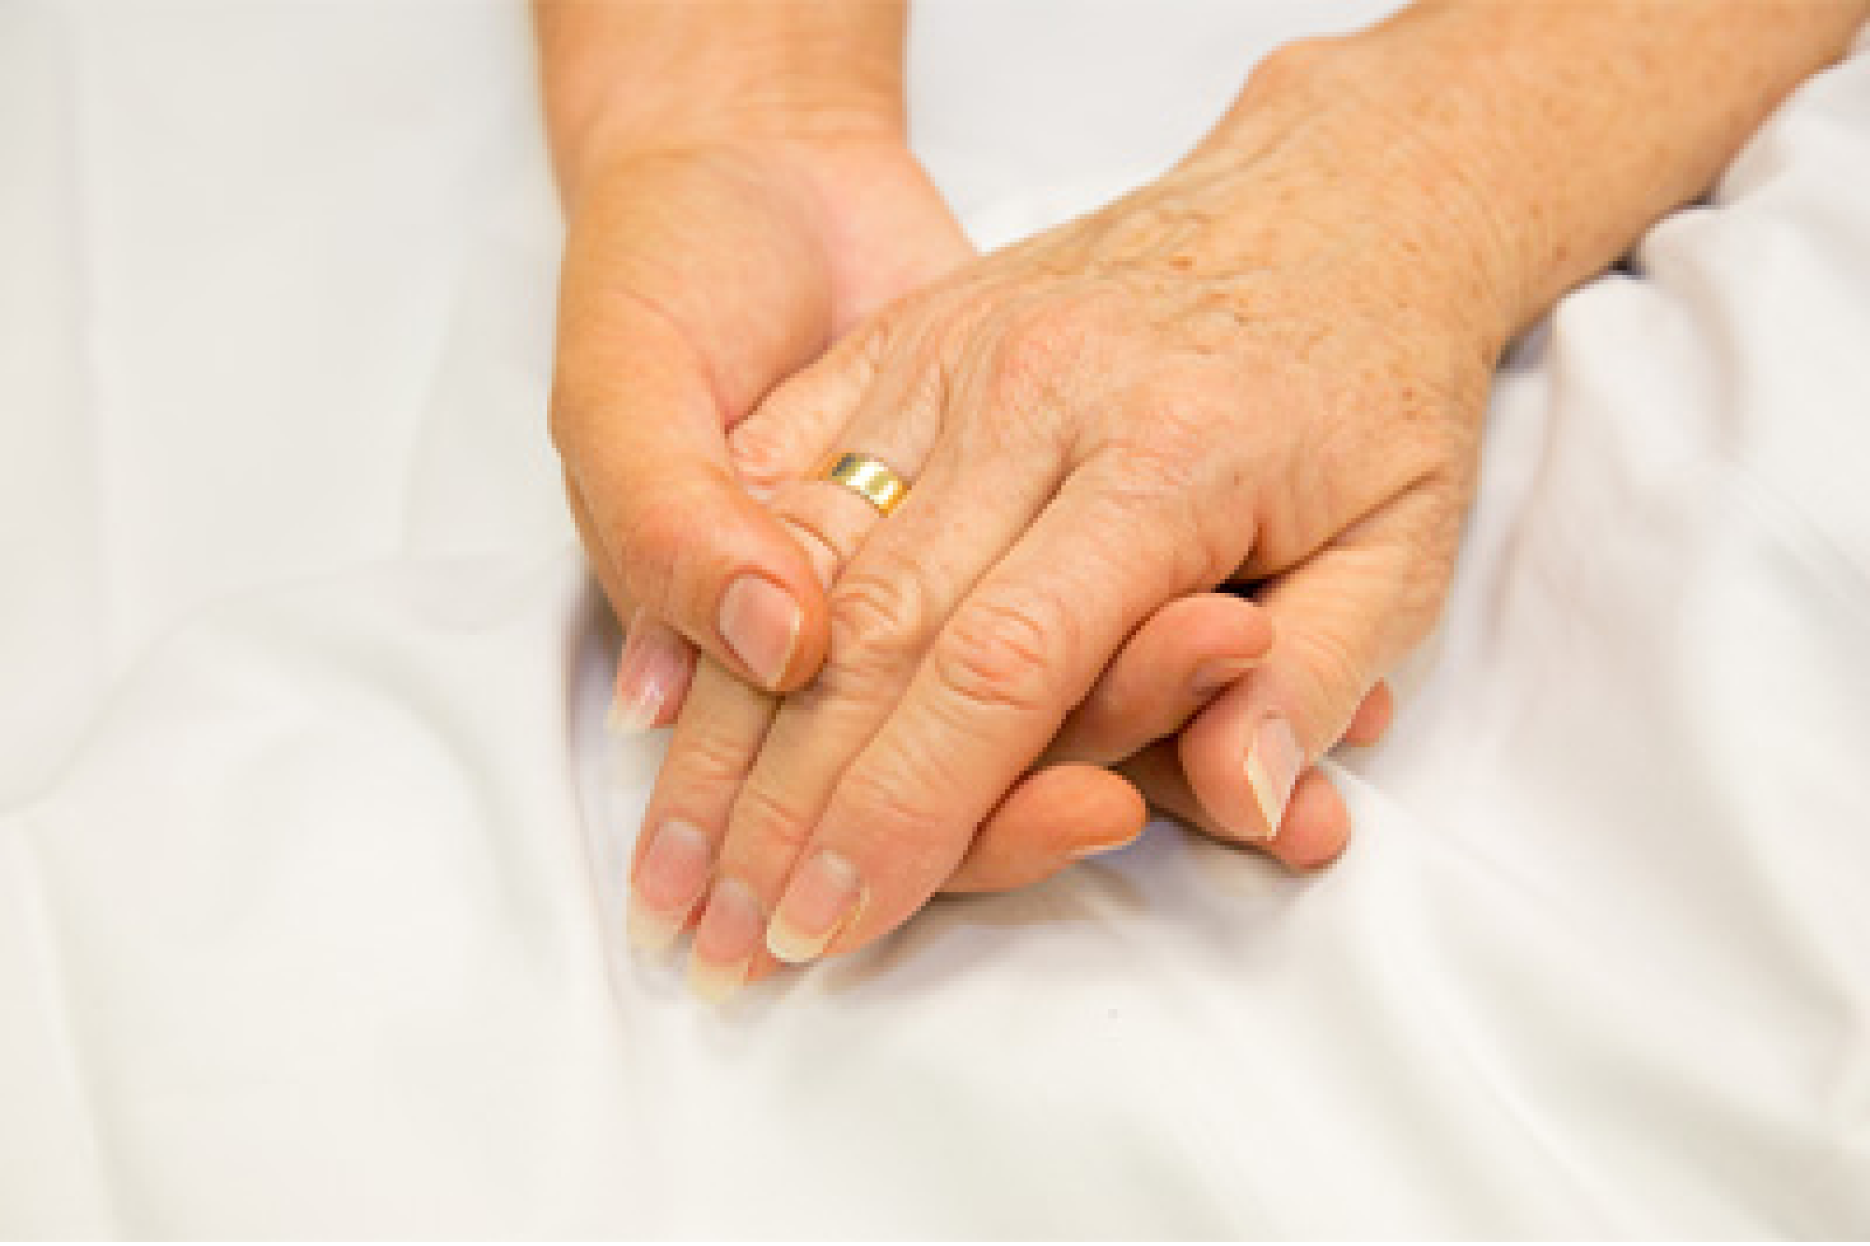 Two hands clasped together on a hospital bed.